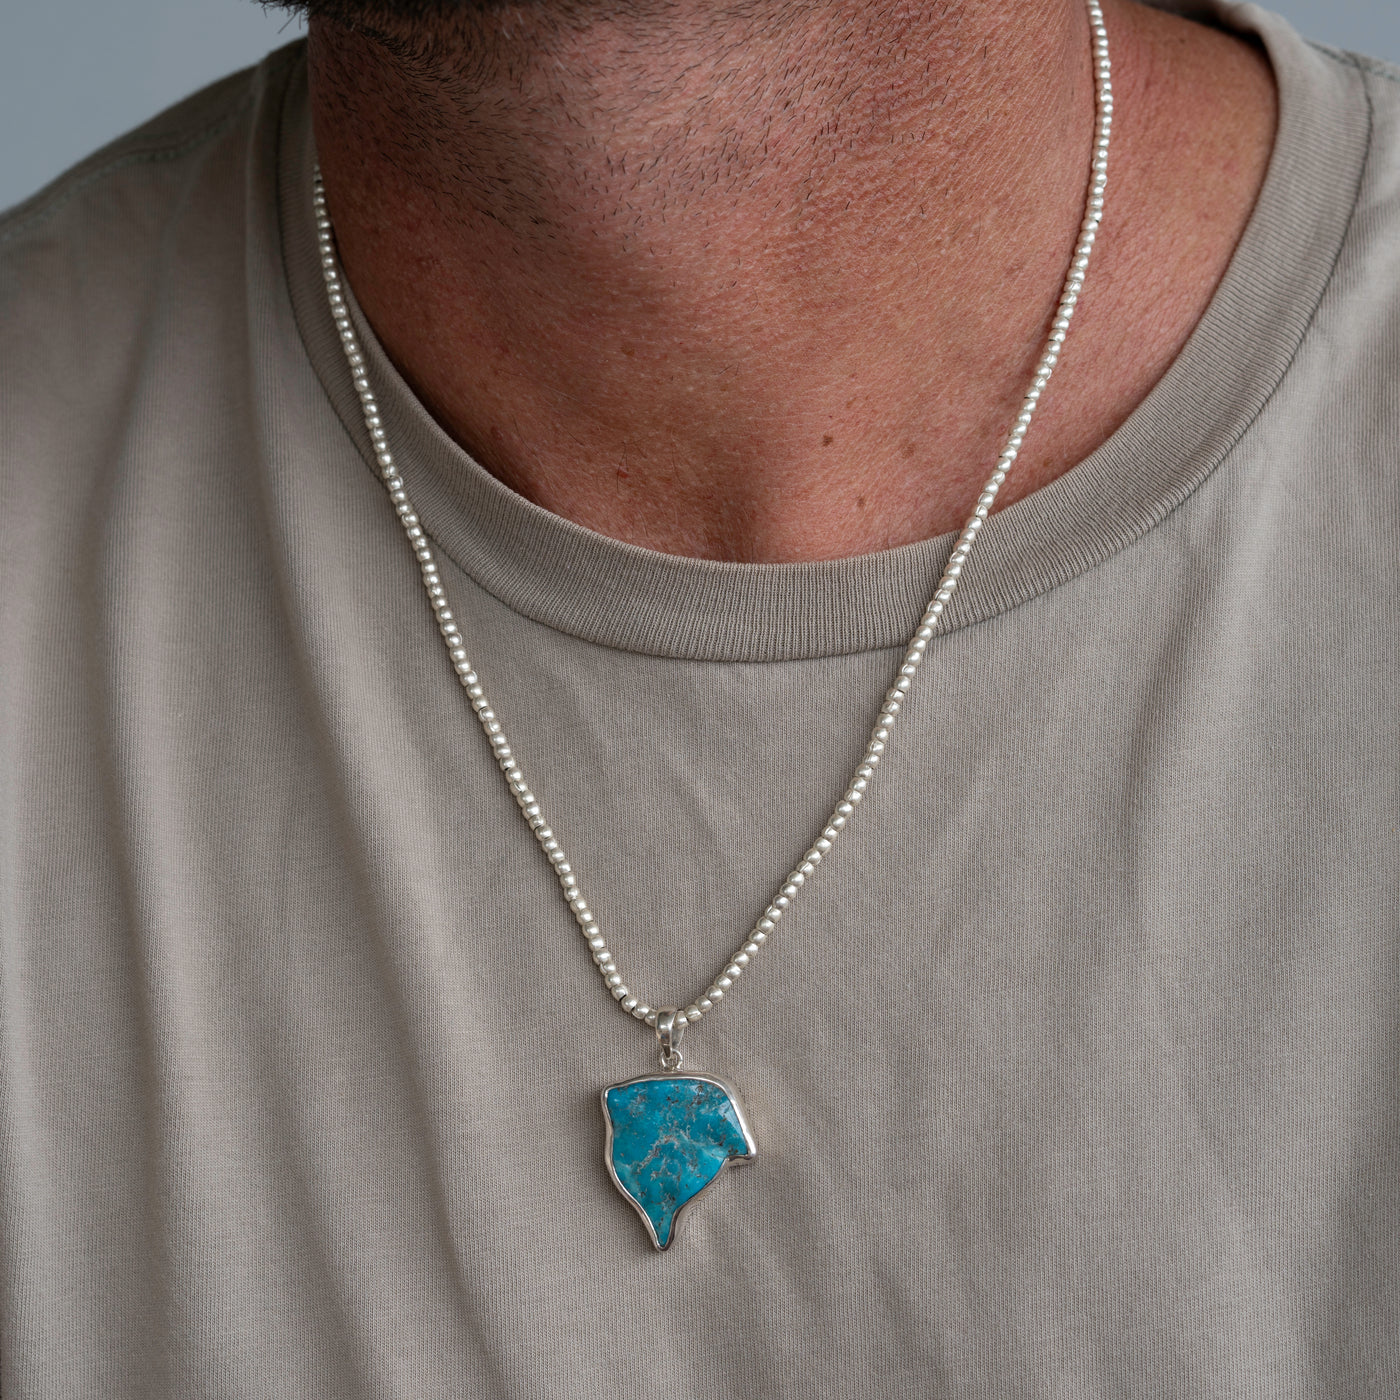 Men's Raw Turquoise Necklace